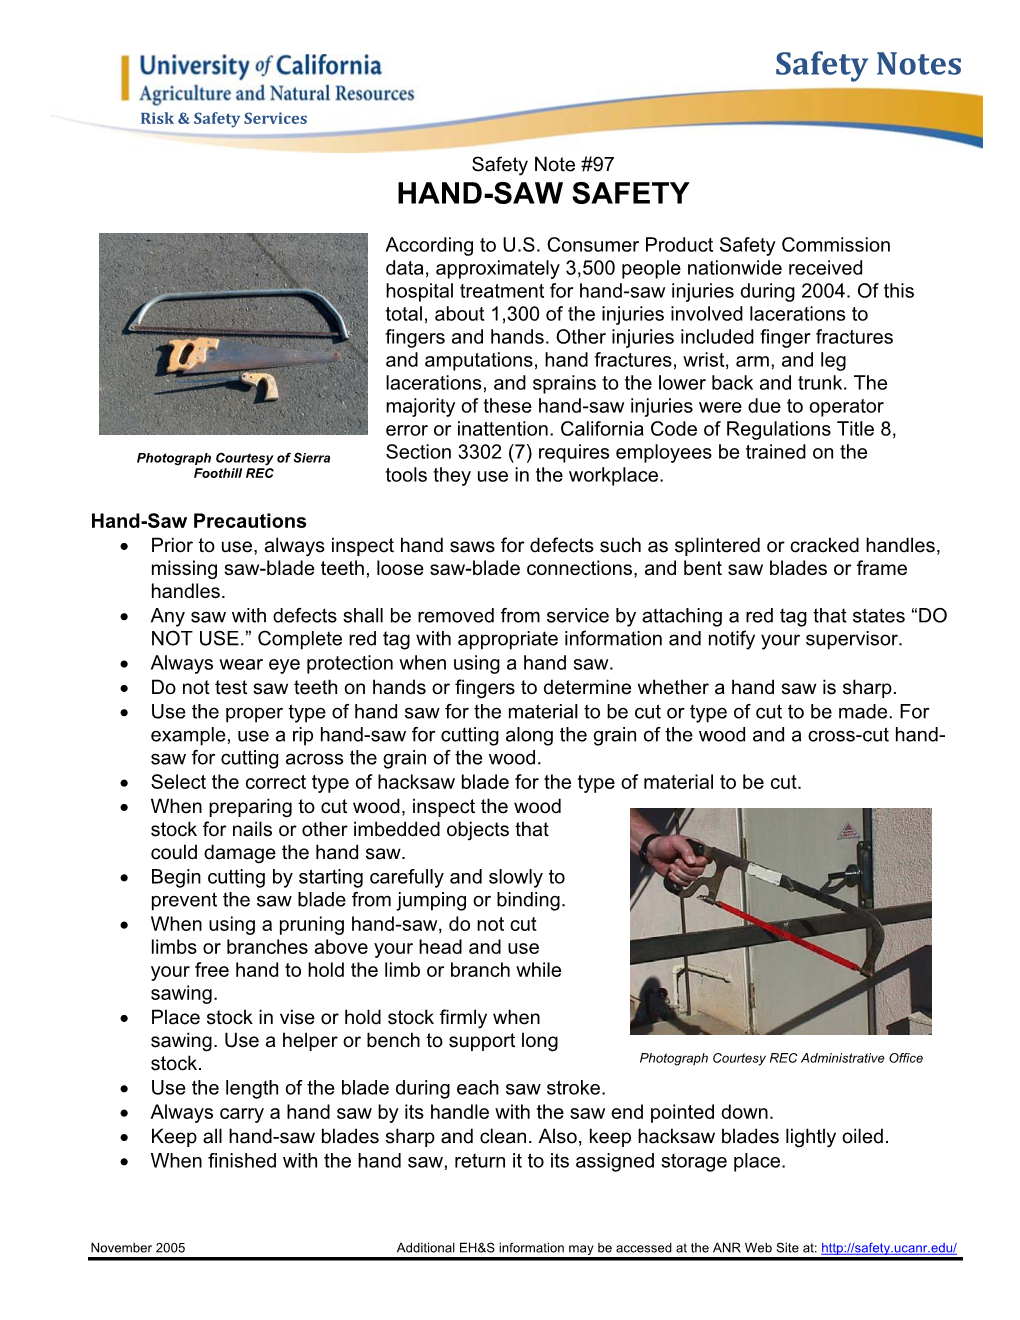 Hand-Saw Safety